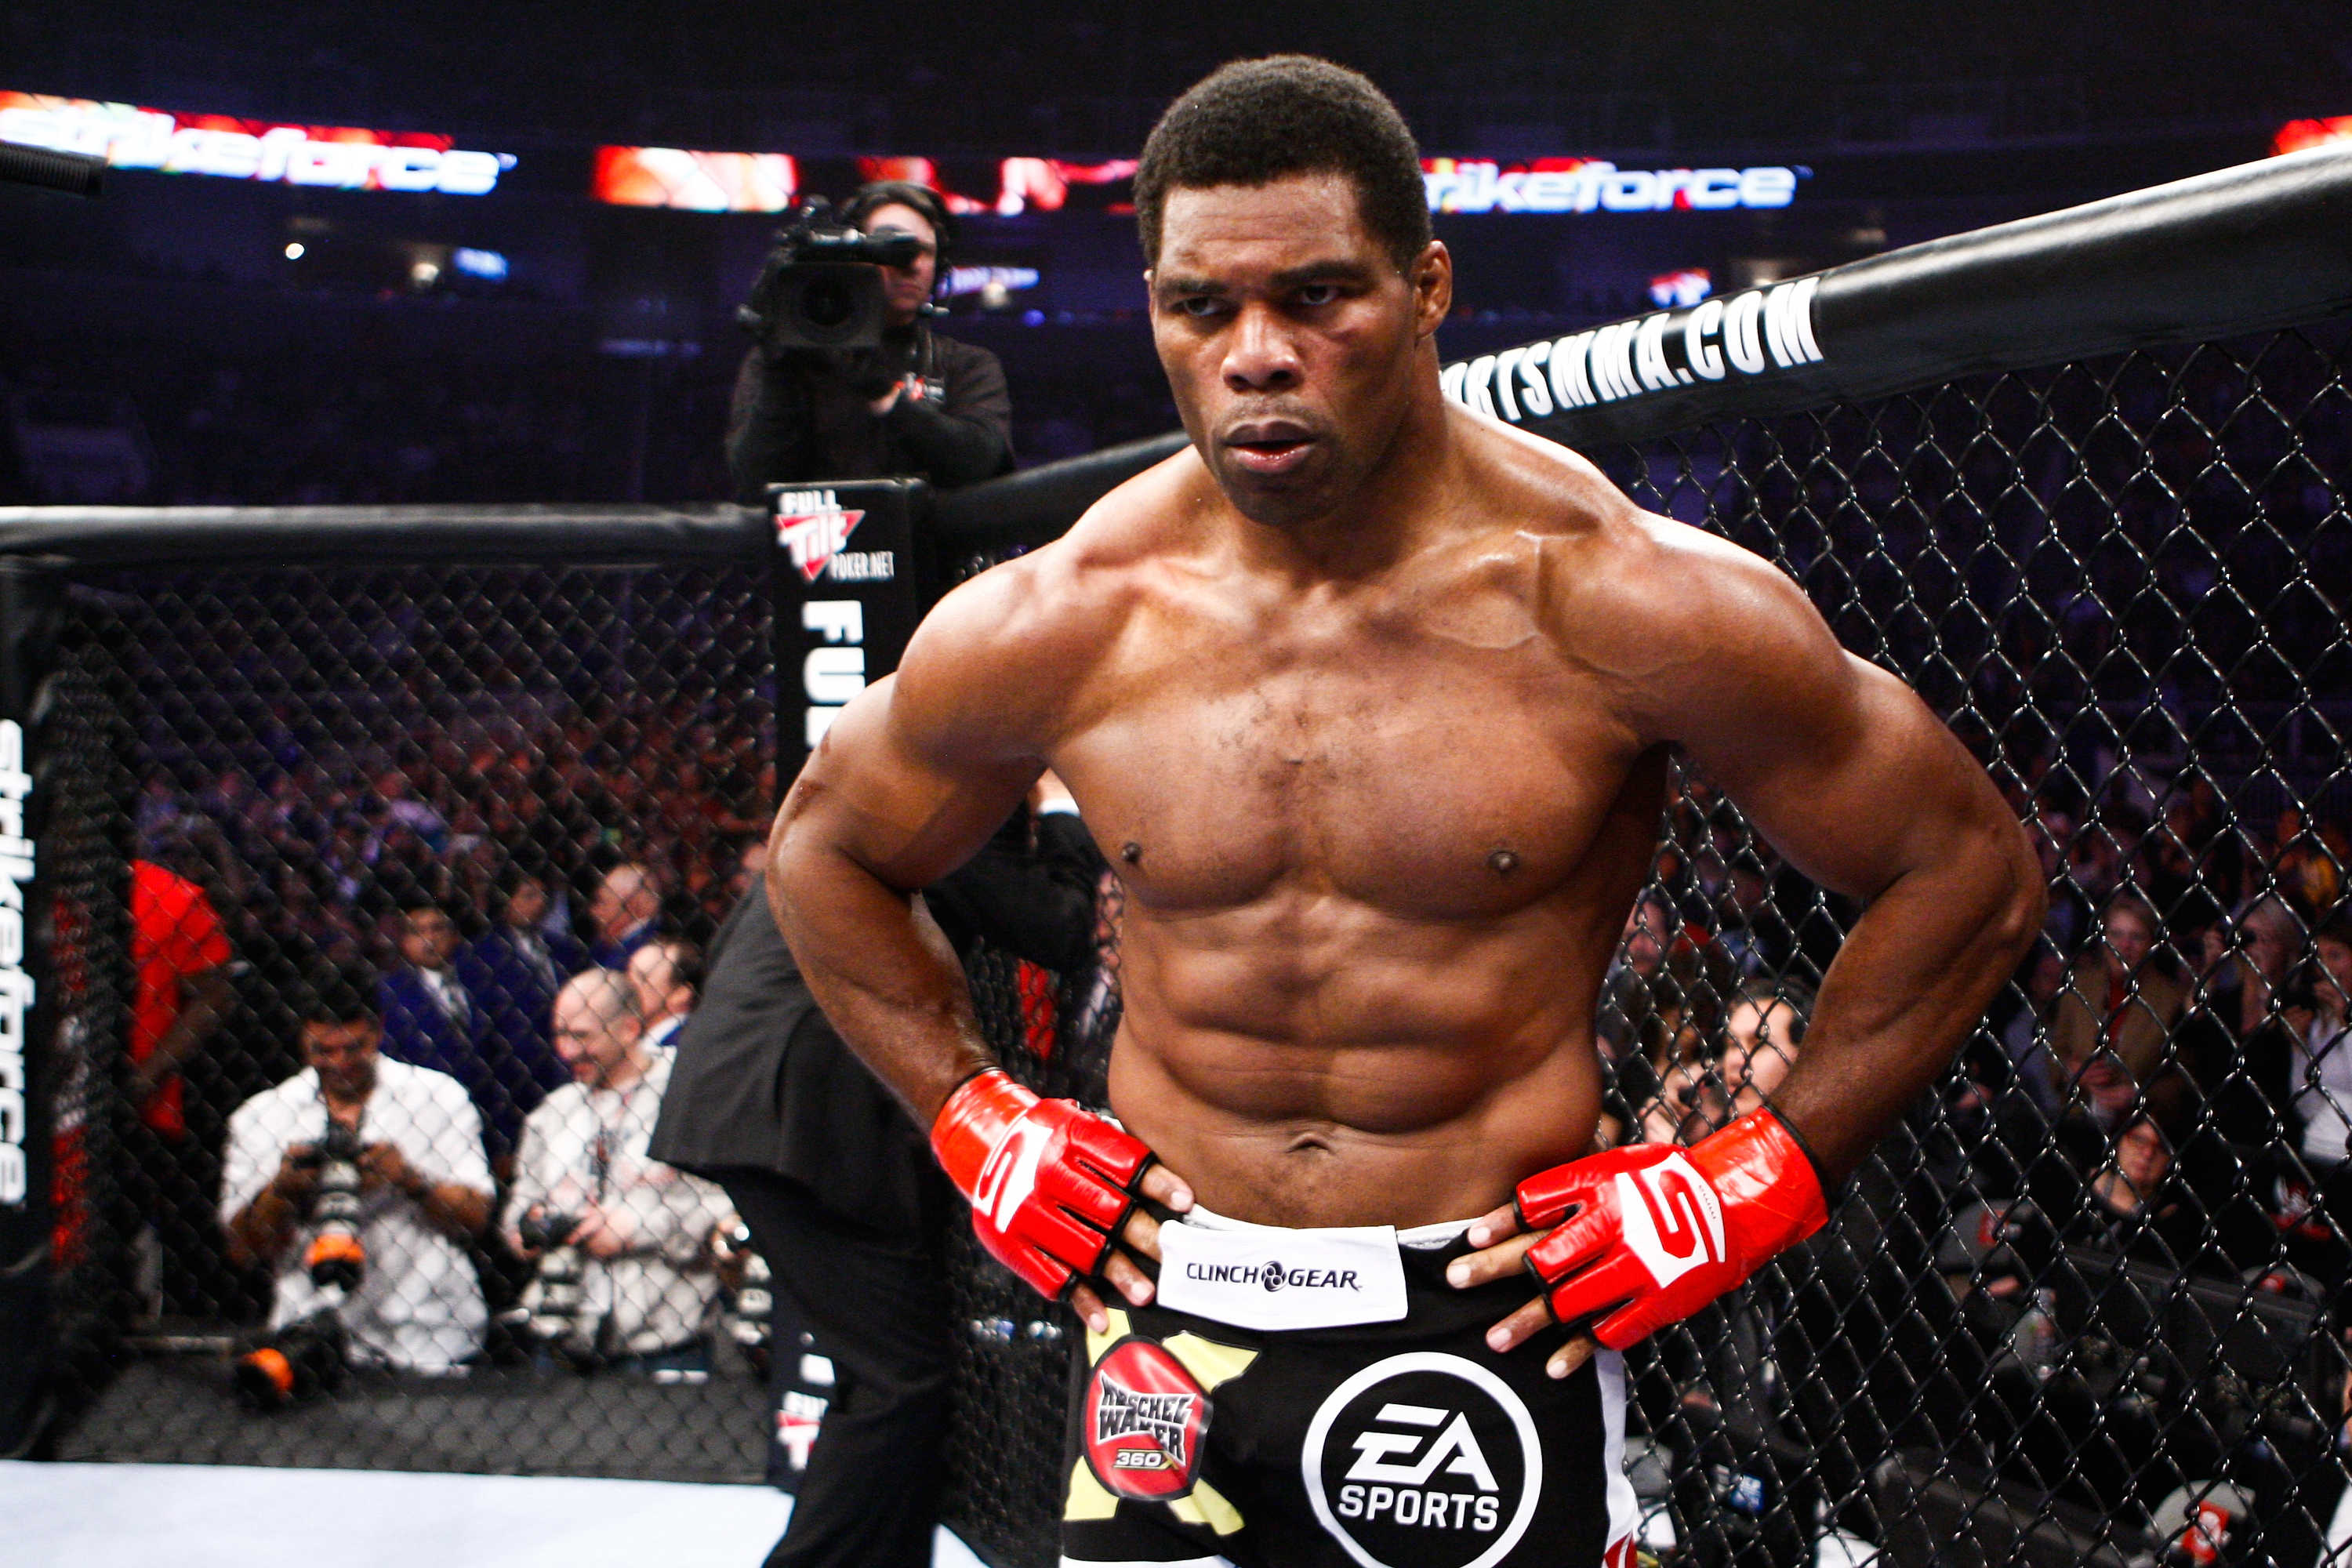 SAN JOSE, CA - JANUARY 29: Herschel Walker celebrates his TKO victory over Scott Carson at the Strikeforce: Diaz vs. Cyborg event at the HP Pavilion on January 29, 2011 in San Jose, California. (Photo by Esther Lin/Zuffa LLC/Zuffa LLC via Getty Images)